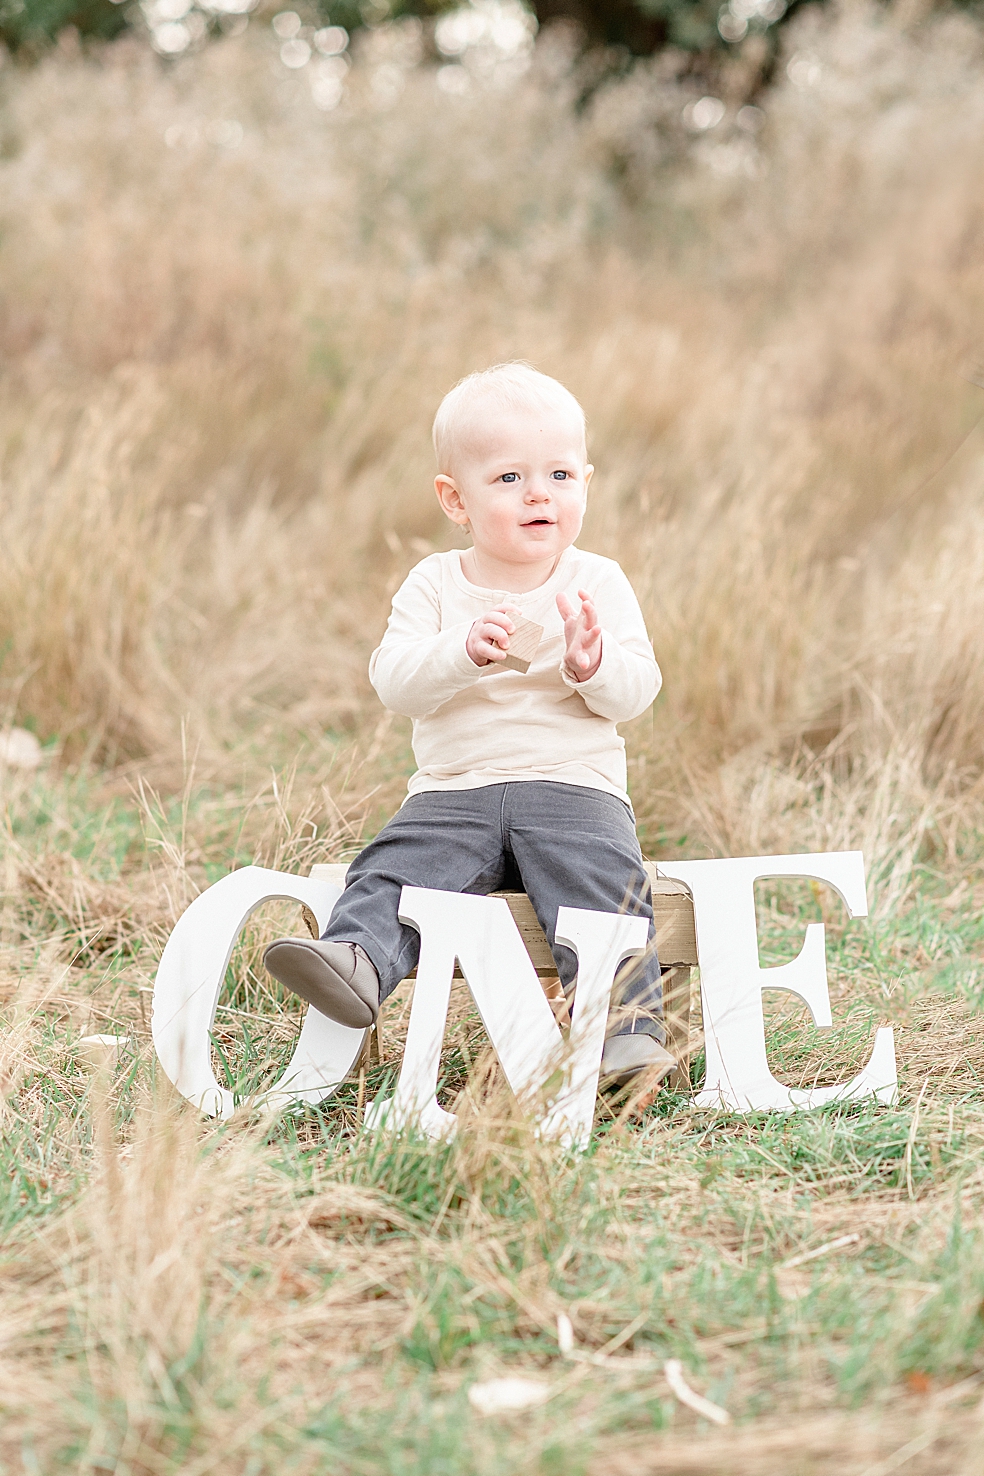 Baby boy sitting with letters spelling "one" | Photo by Jessica Lee Photography 